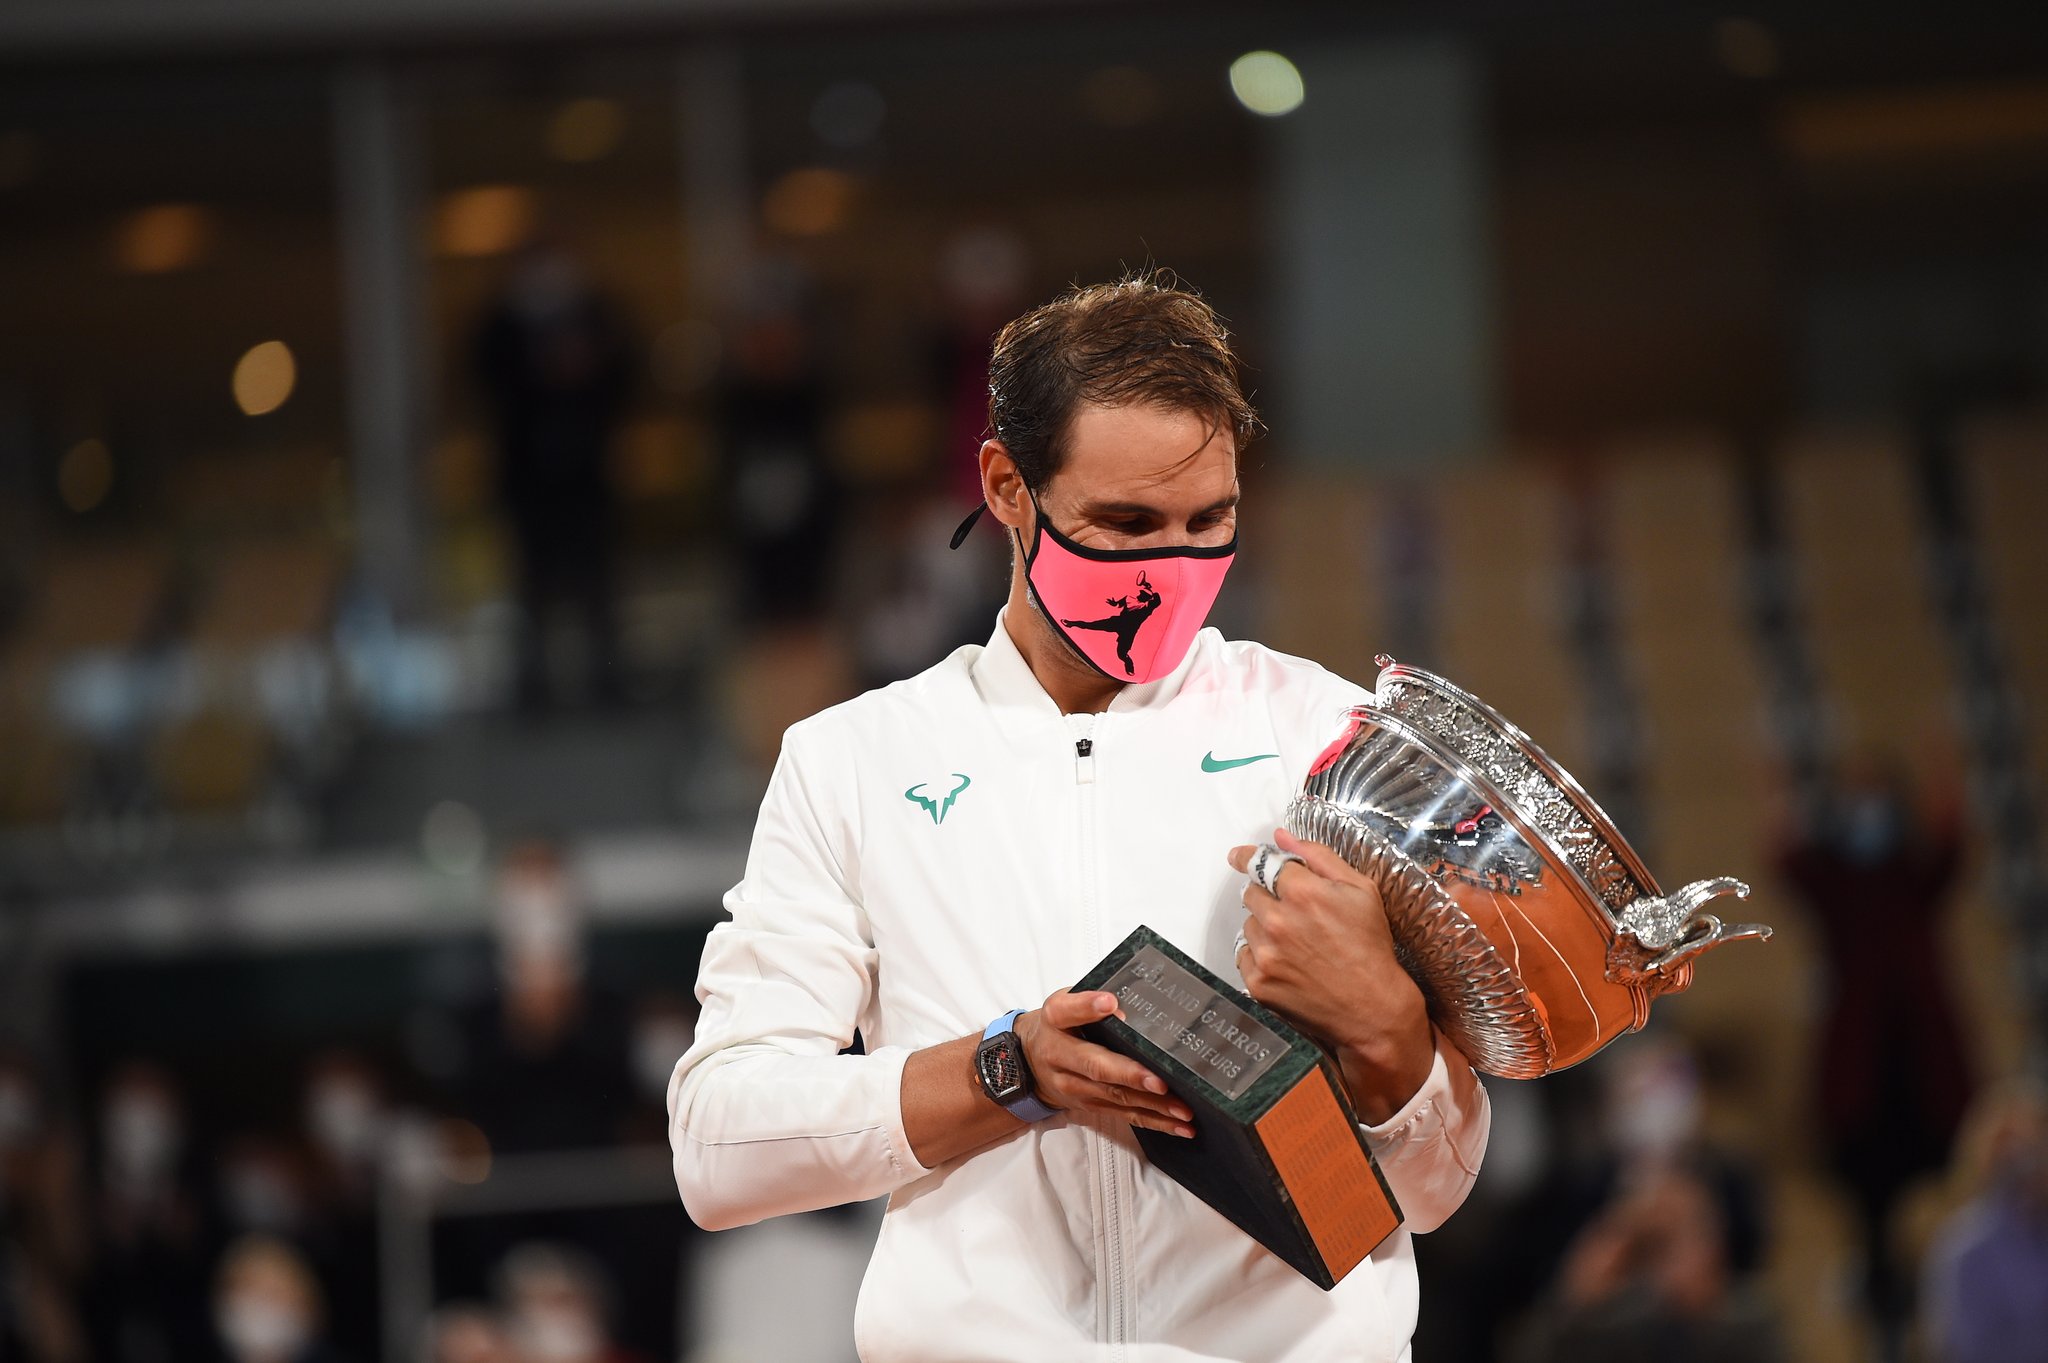 Rafael Nadal beats Novak Djokovic to lift French Open 2020 title; equals Roger Federer’s record